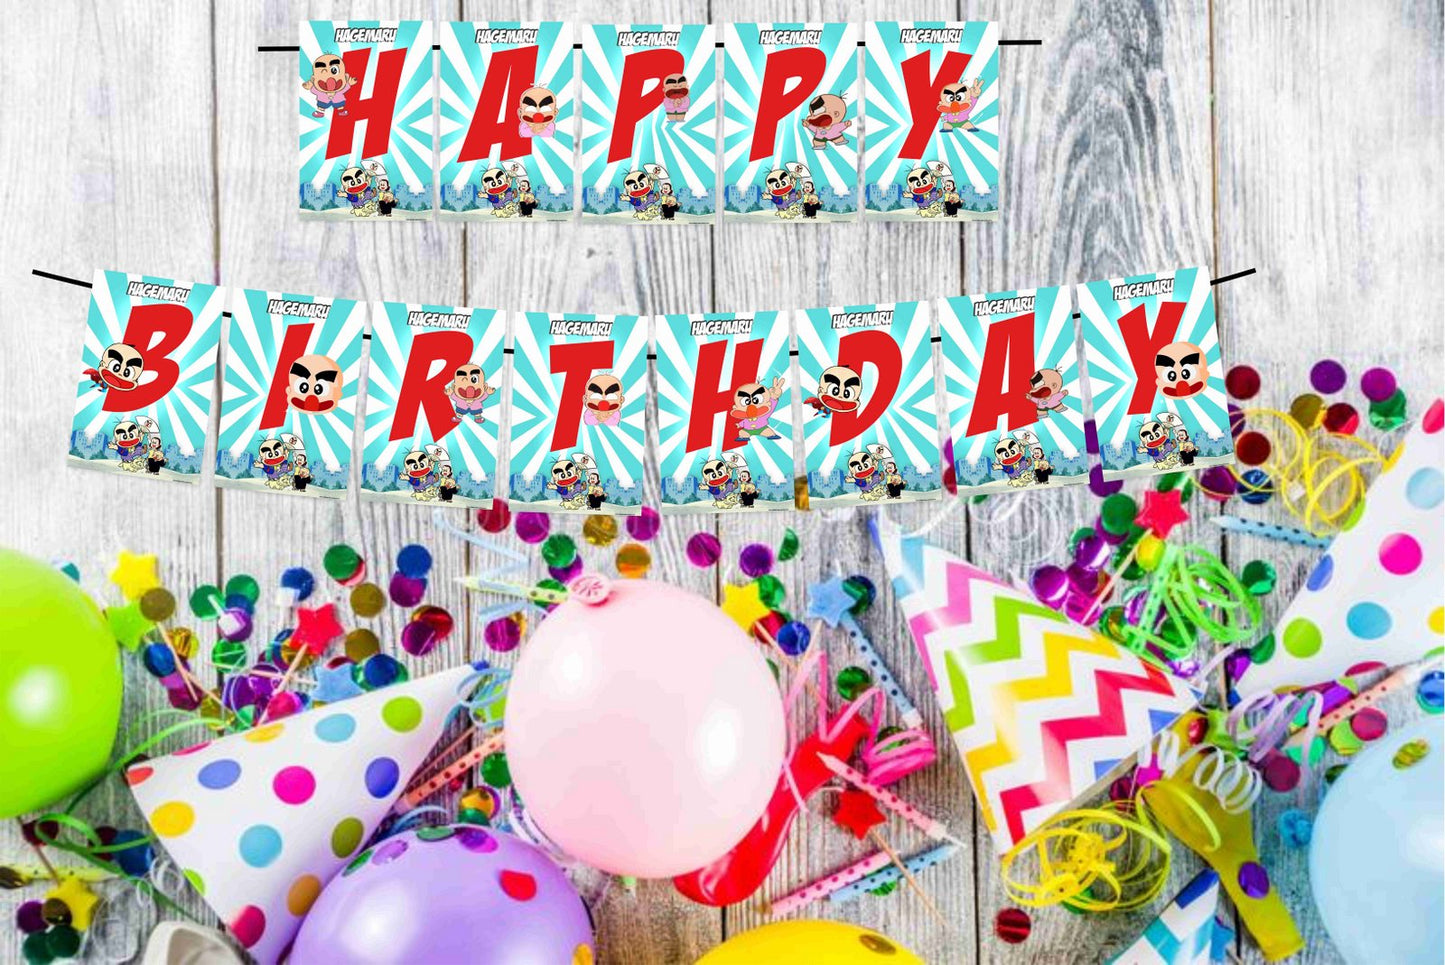 Haagemaru Happy Birthday Decoration Hanging and Banner for Photo Shoot Backdrop and Theme Party